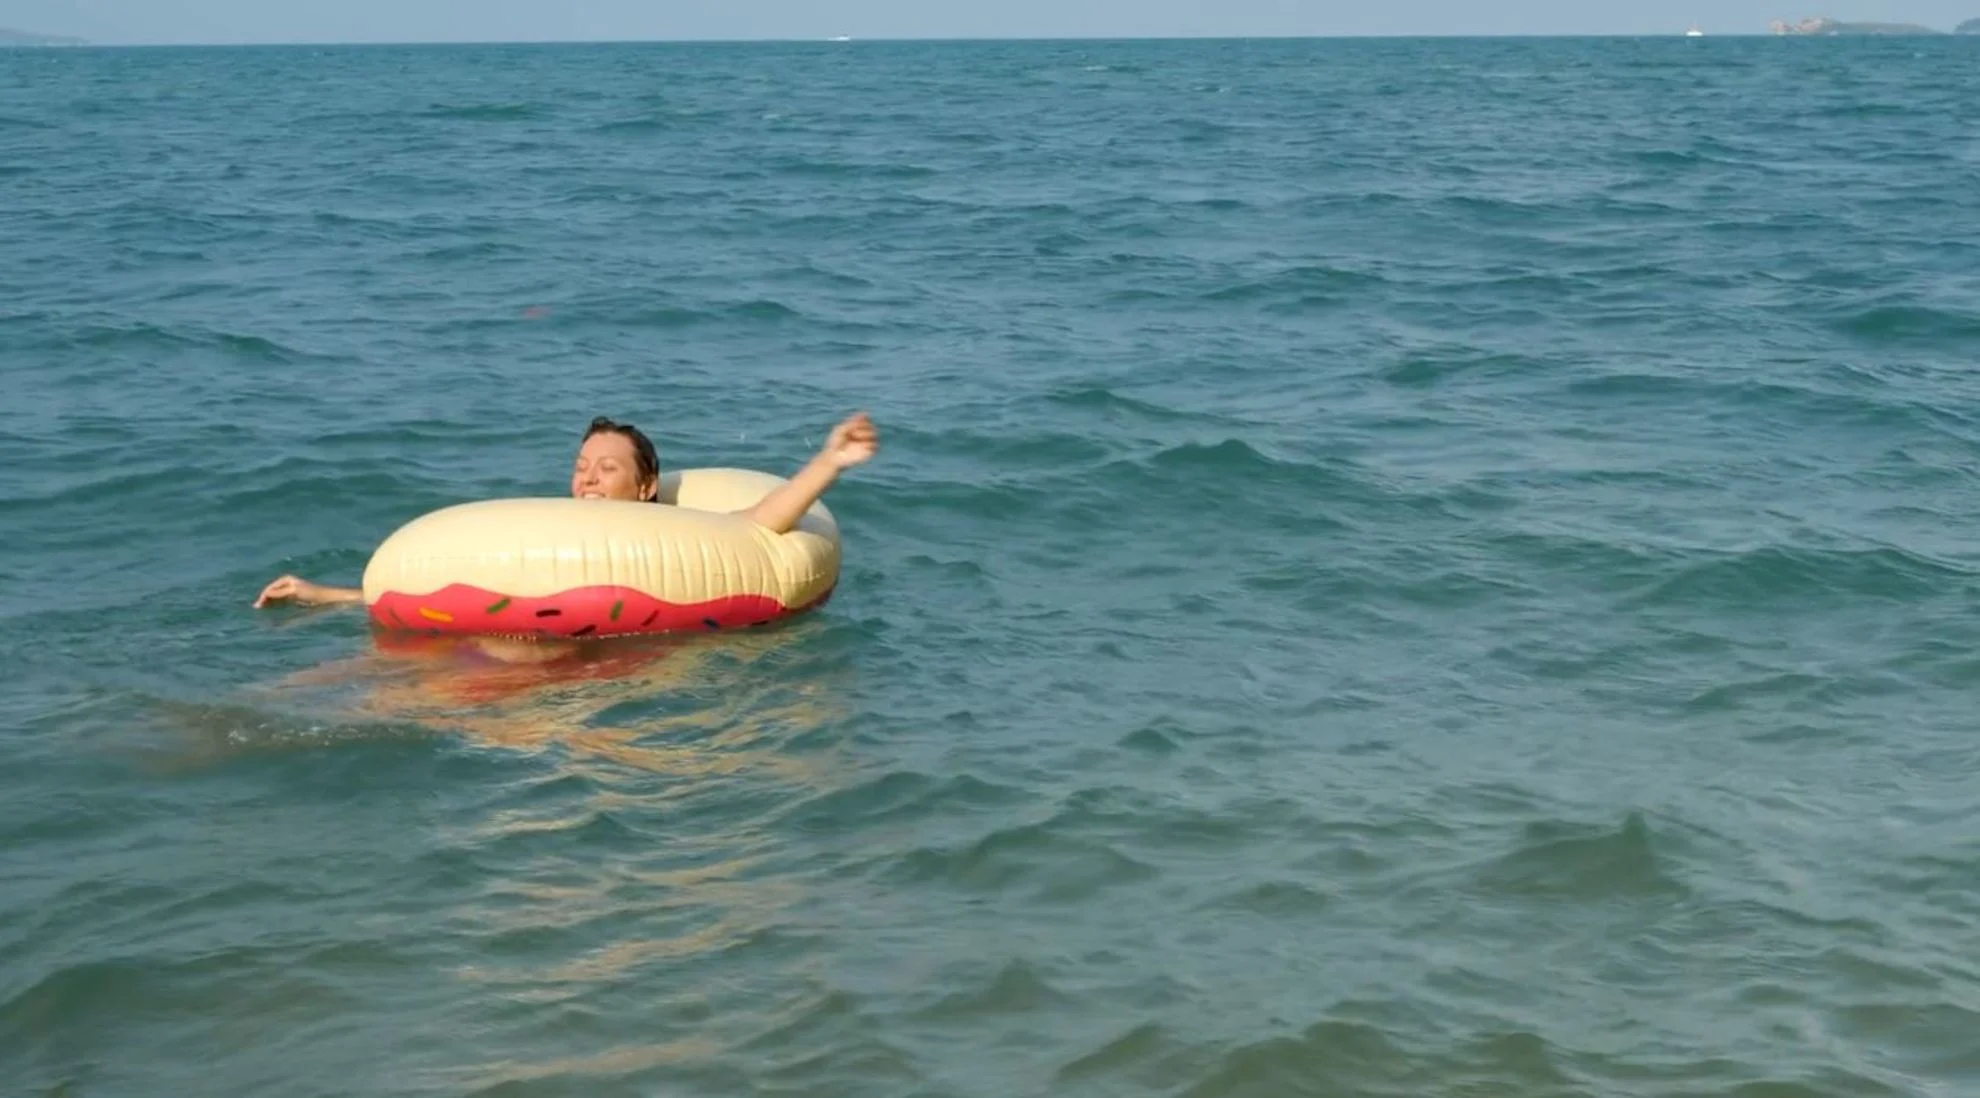 Lake floaties can be fun, but experts suggest you ditch them this summer. Here’s why